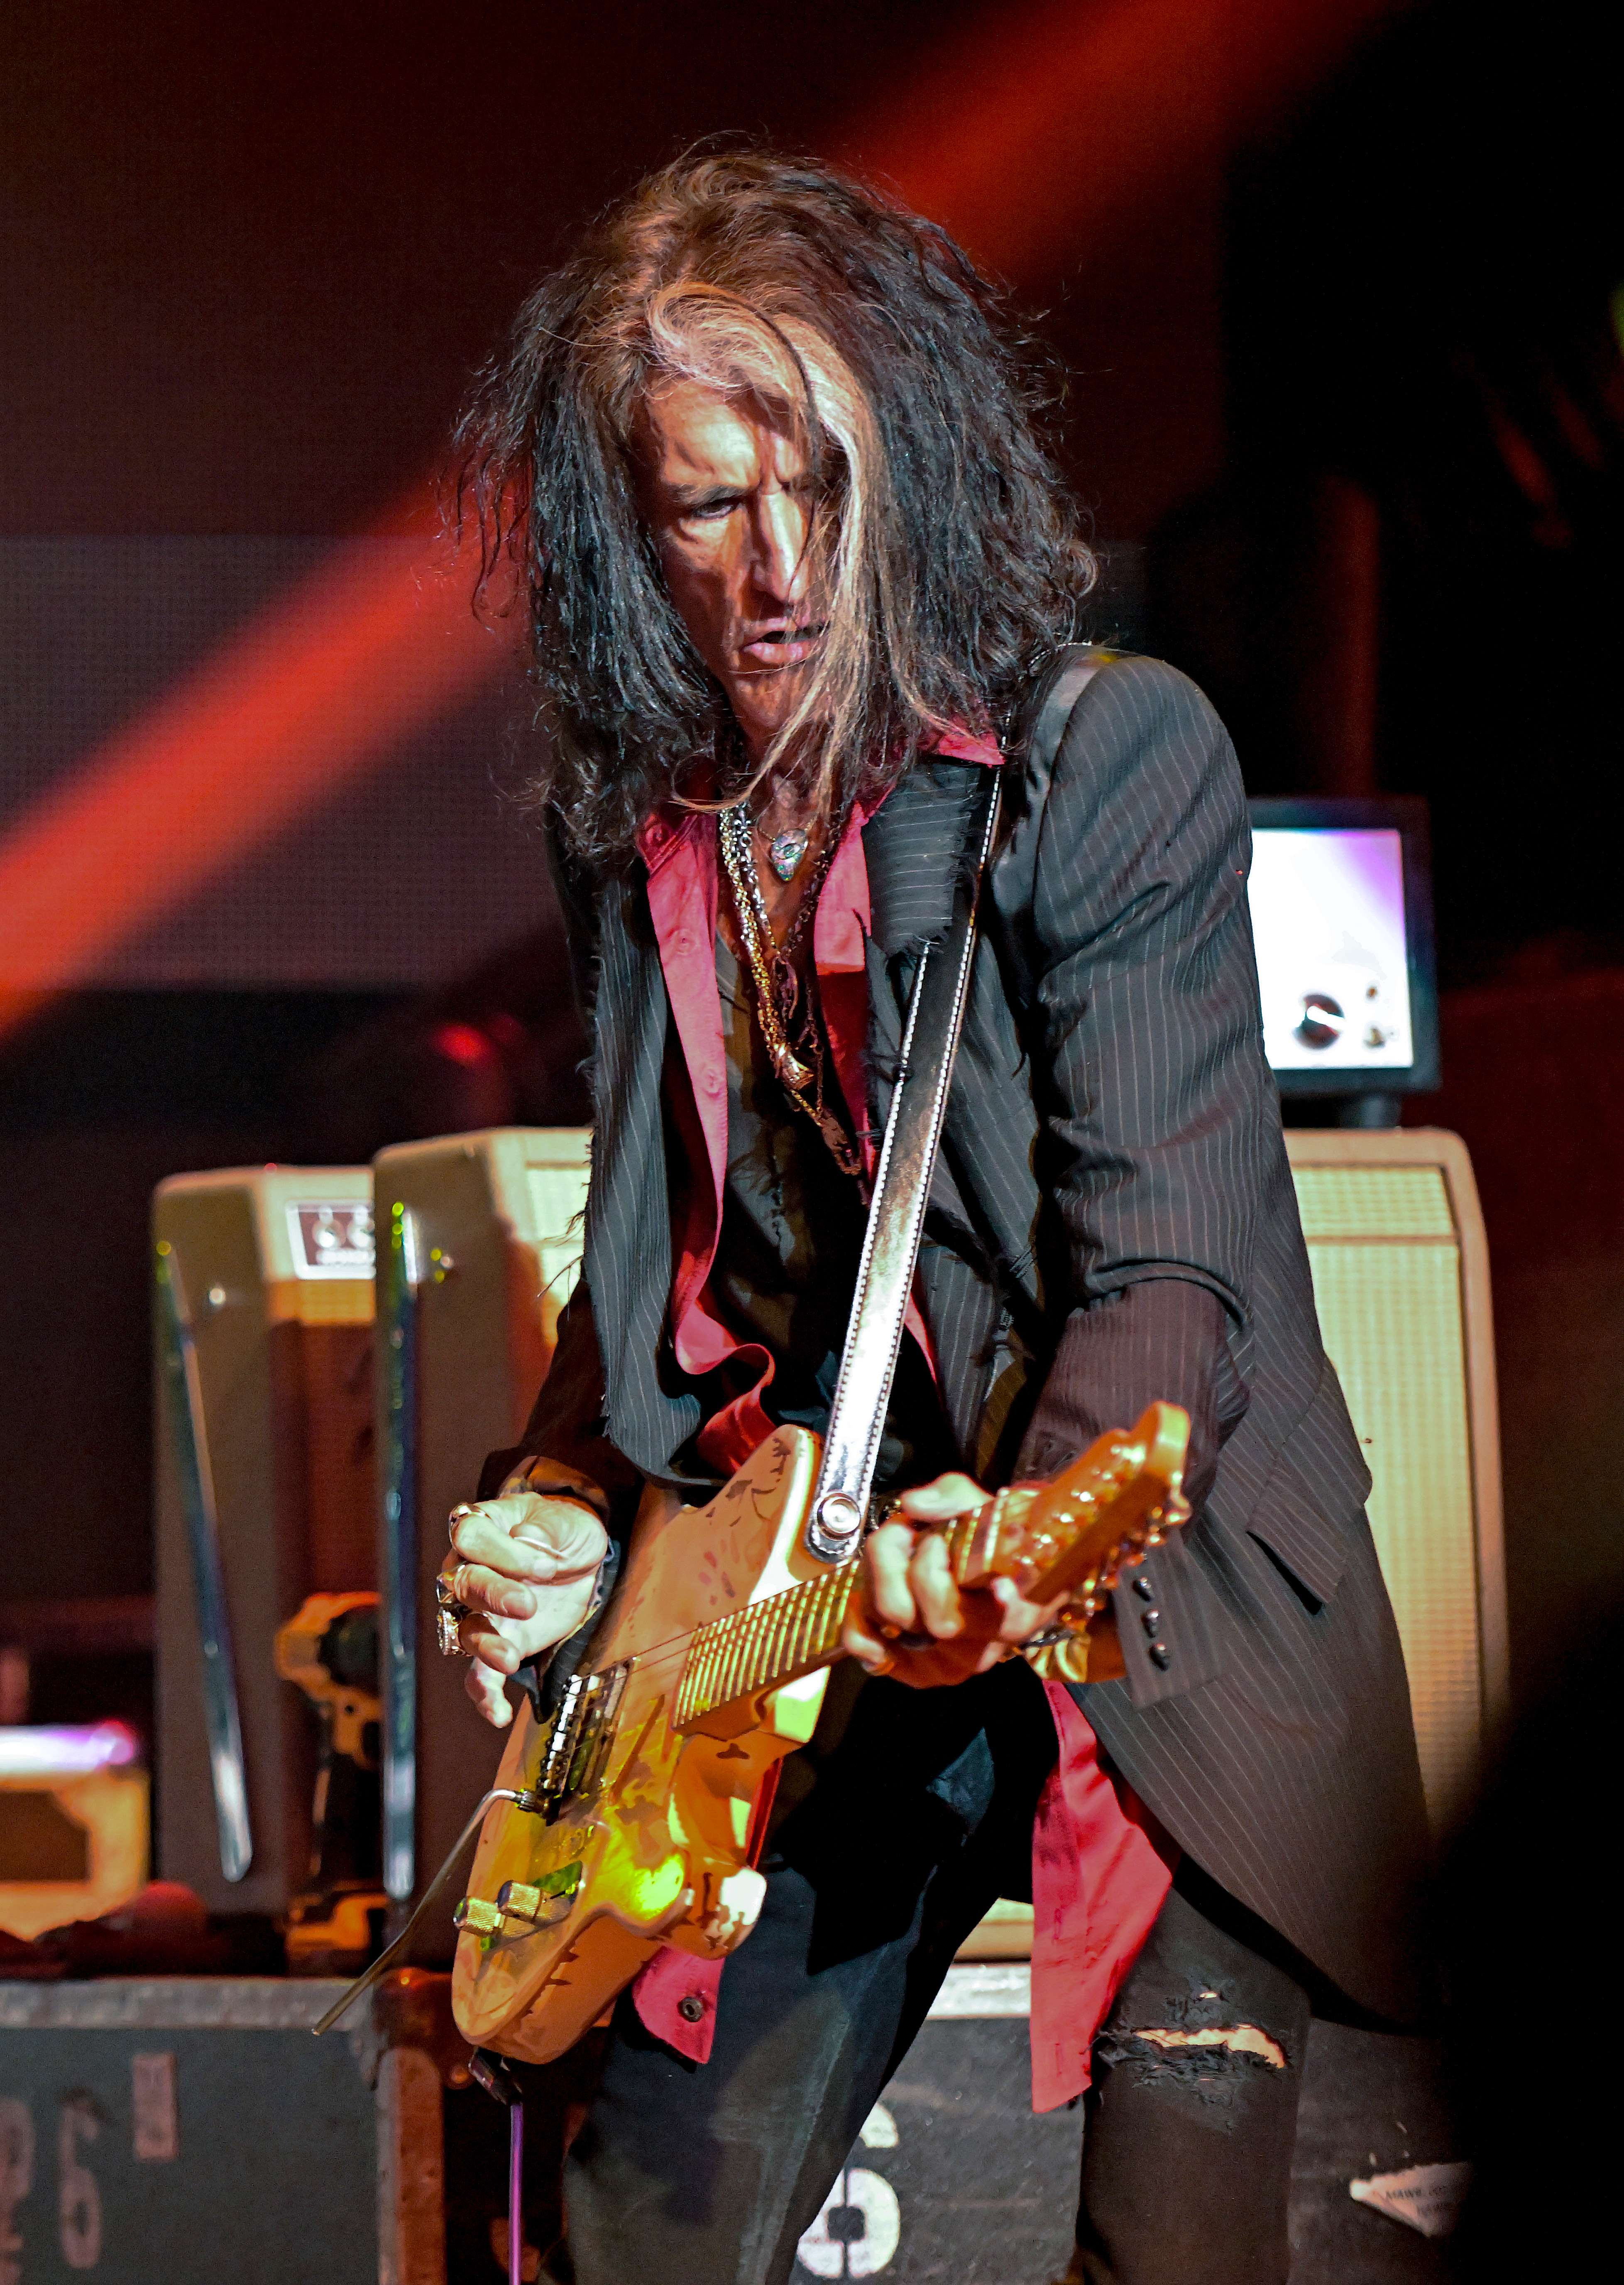 Joe Perry Project Live At Arcada [GALLERY] 13